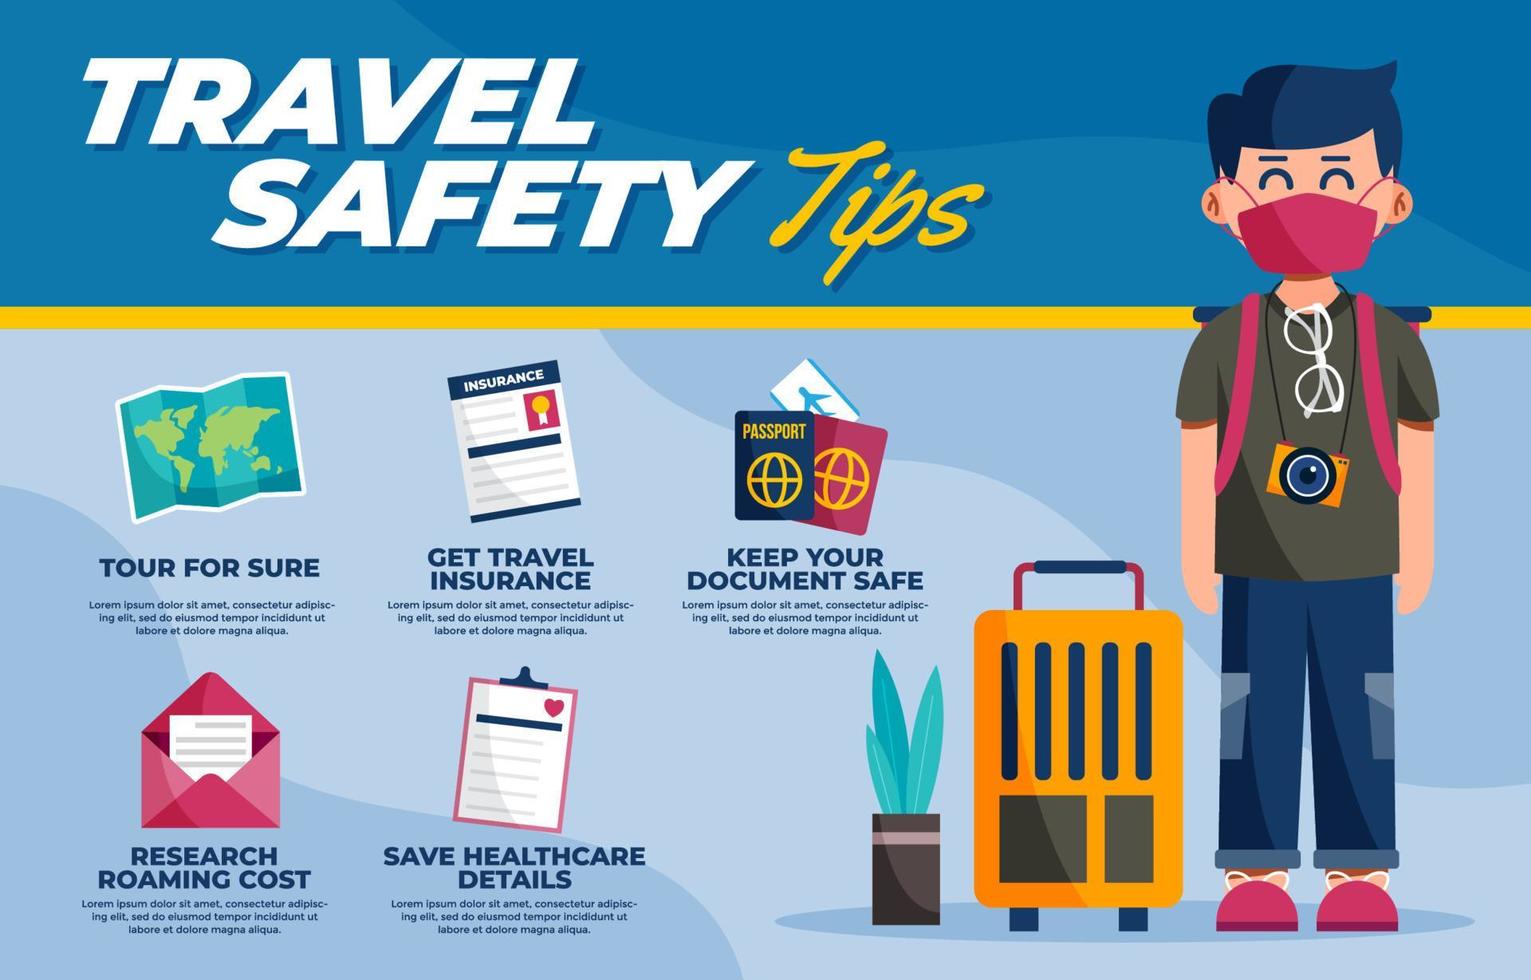 International Travel Safety for Professionals